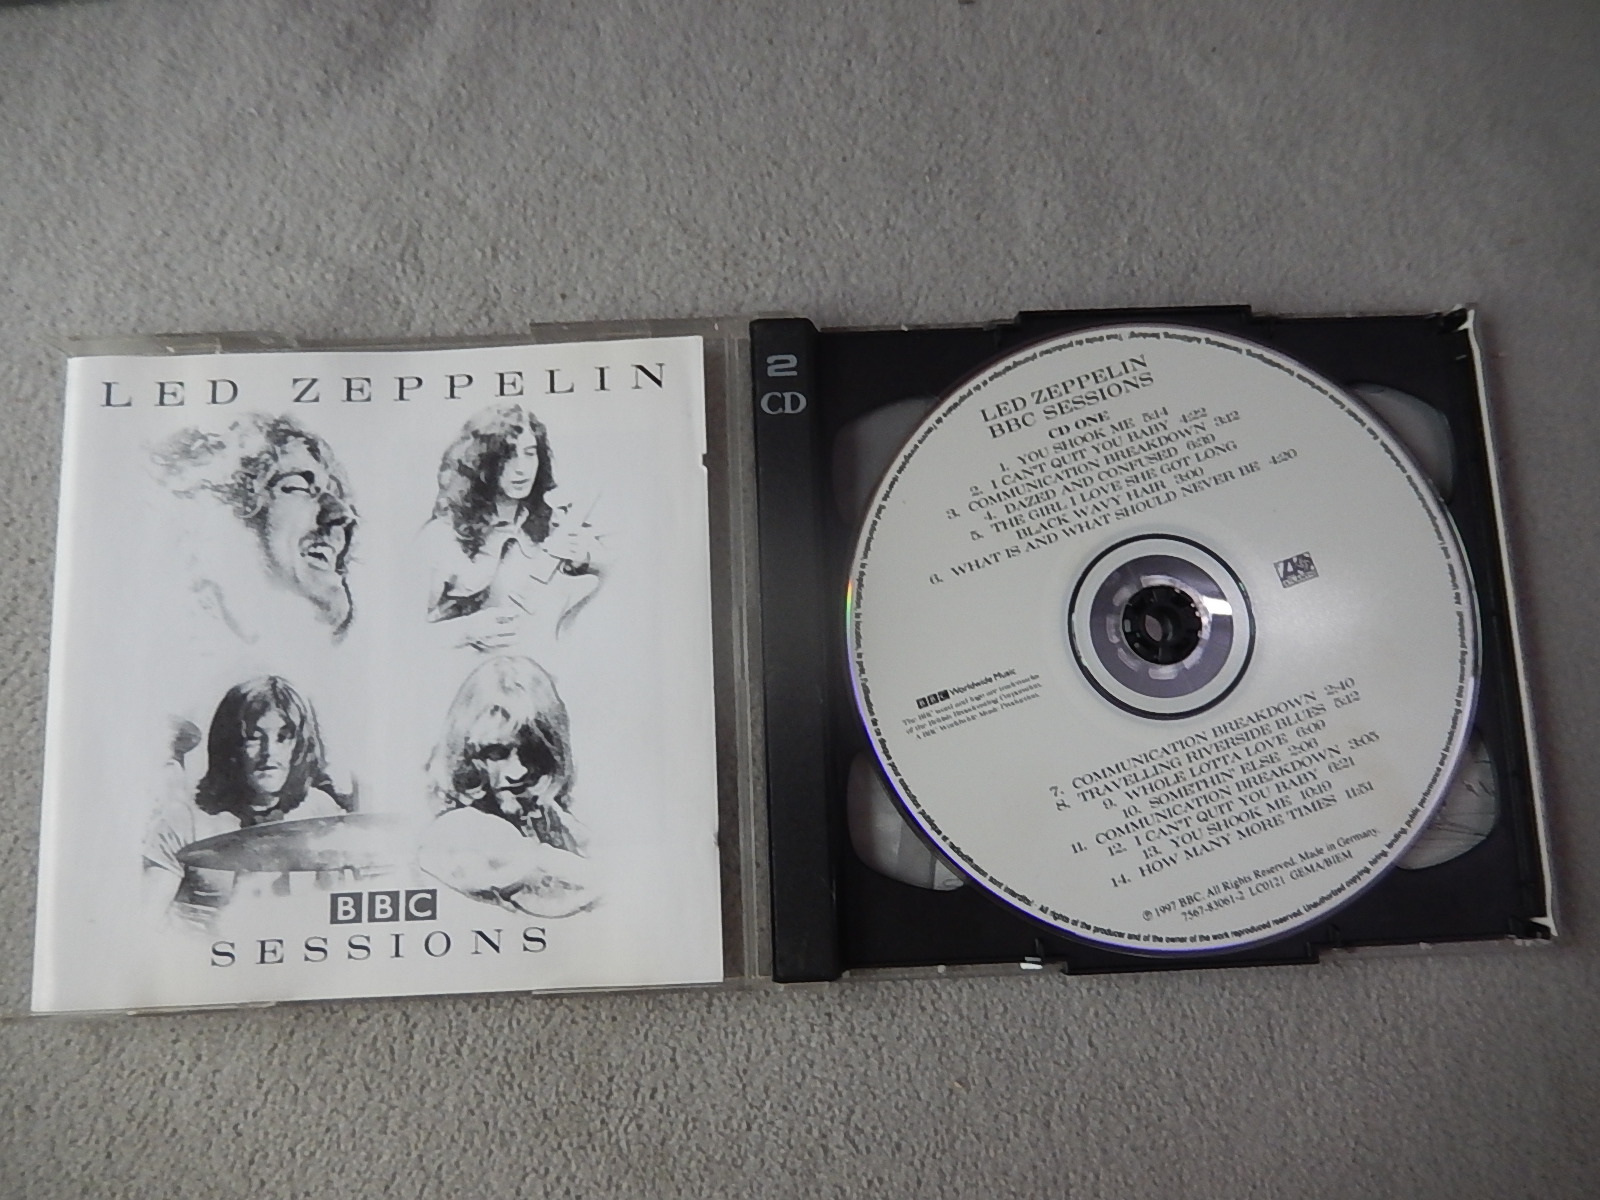 Led zeppelin BBC sessions